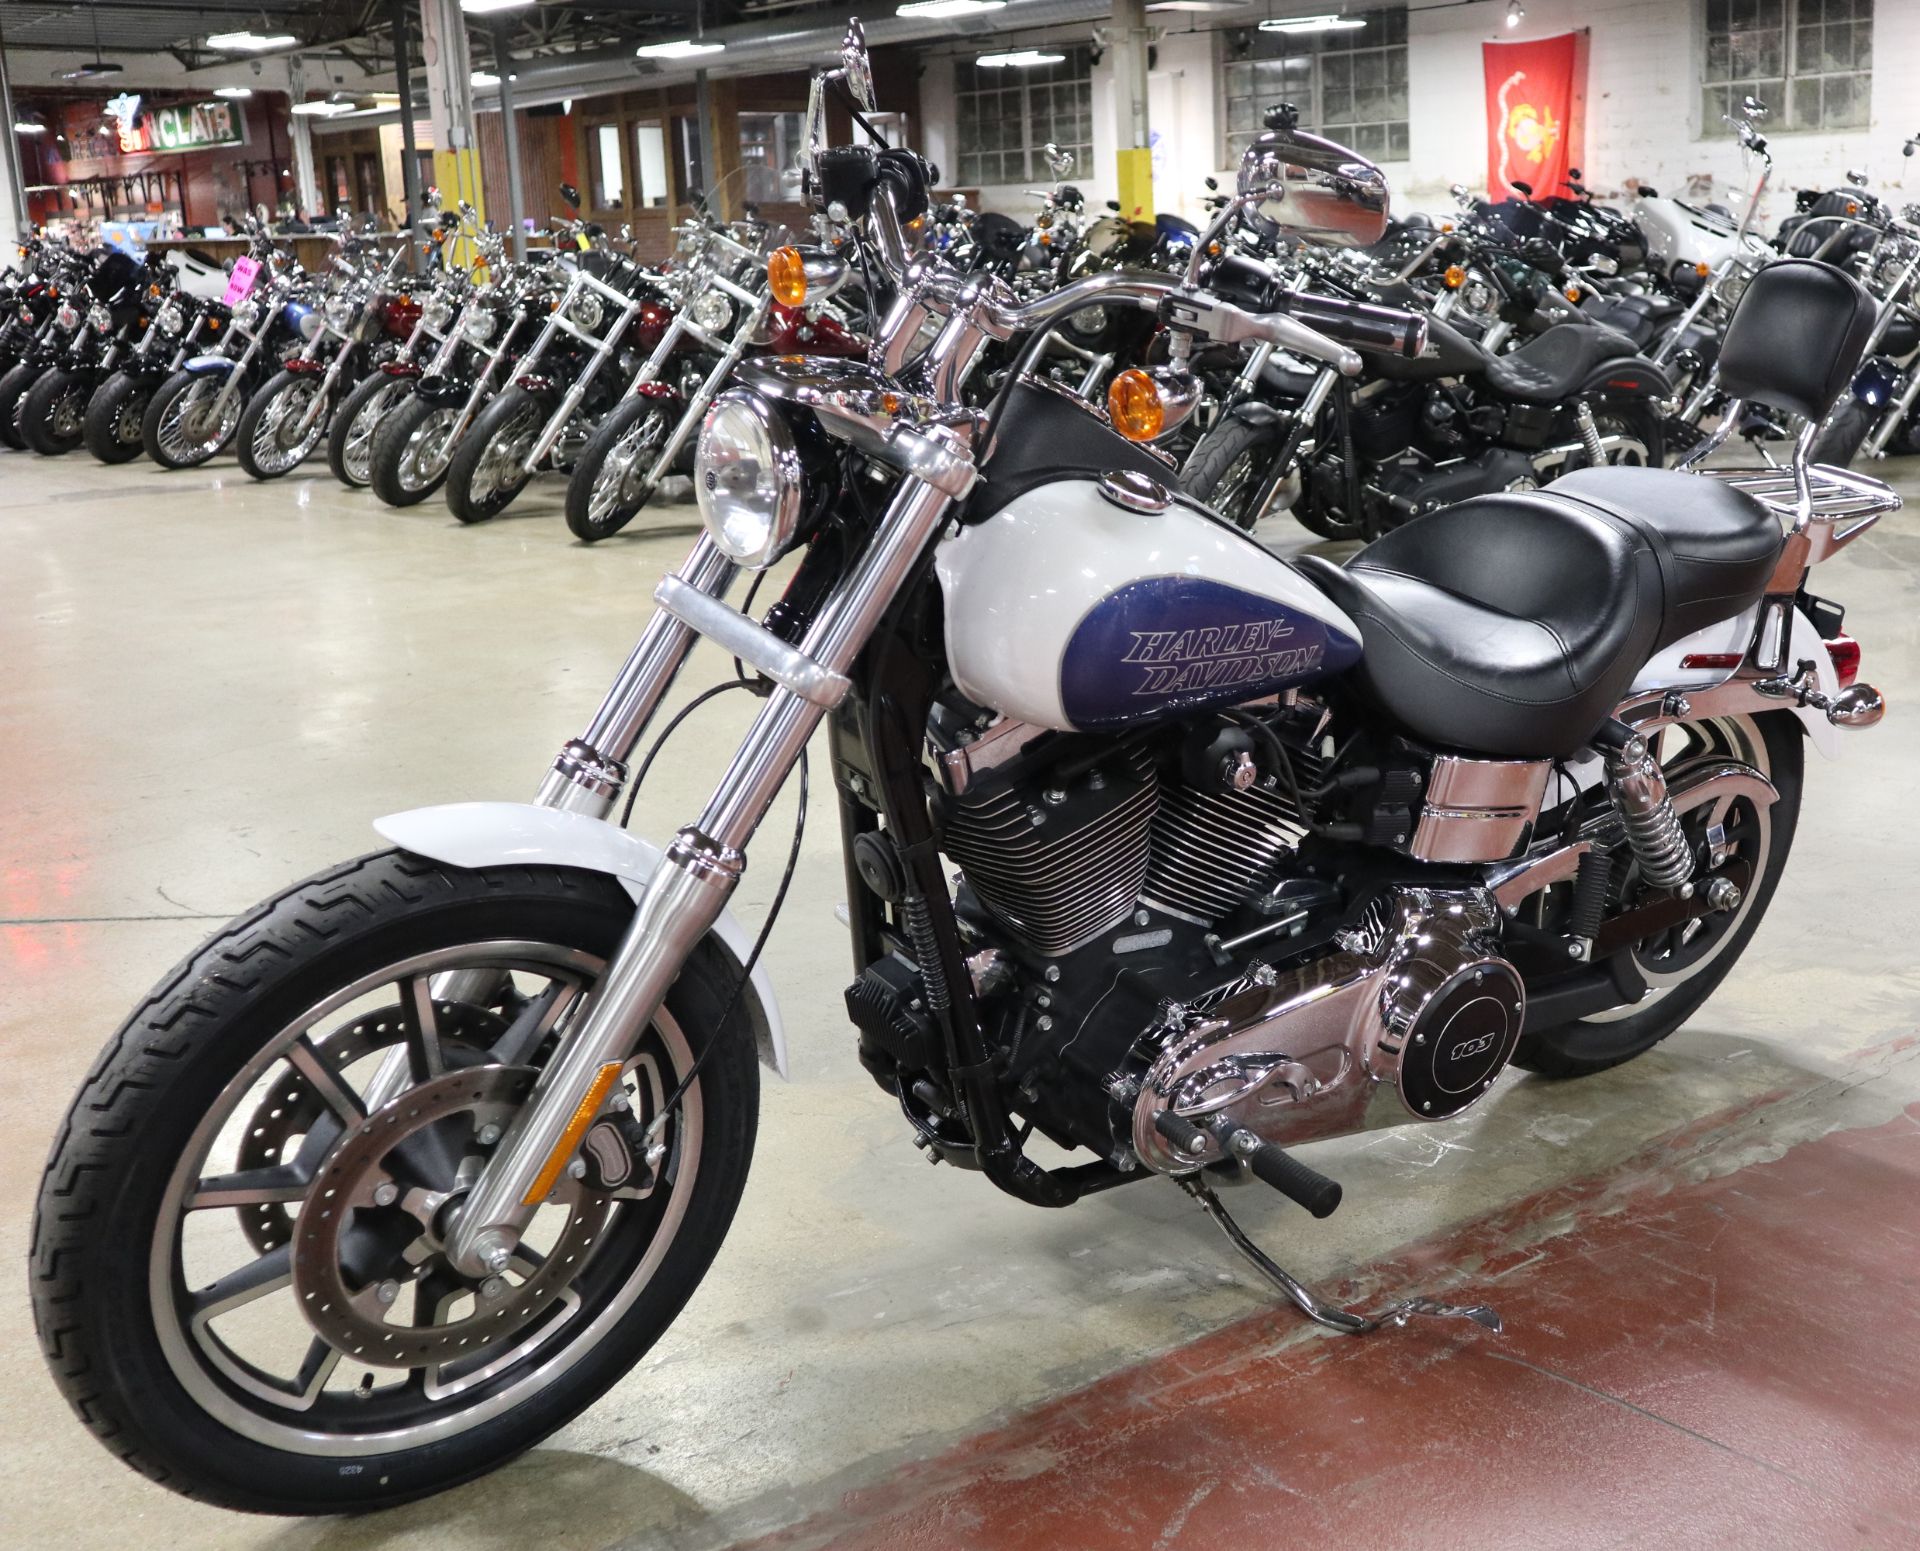 2015 Harley-Davidson Low Rider® in New London, Connecticut - Photo 4